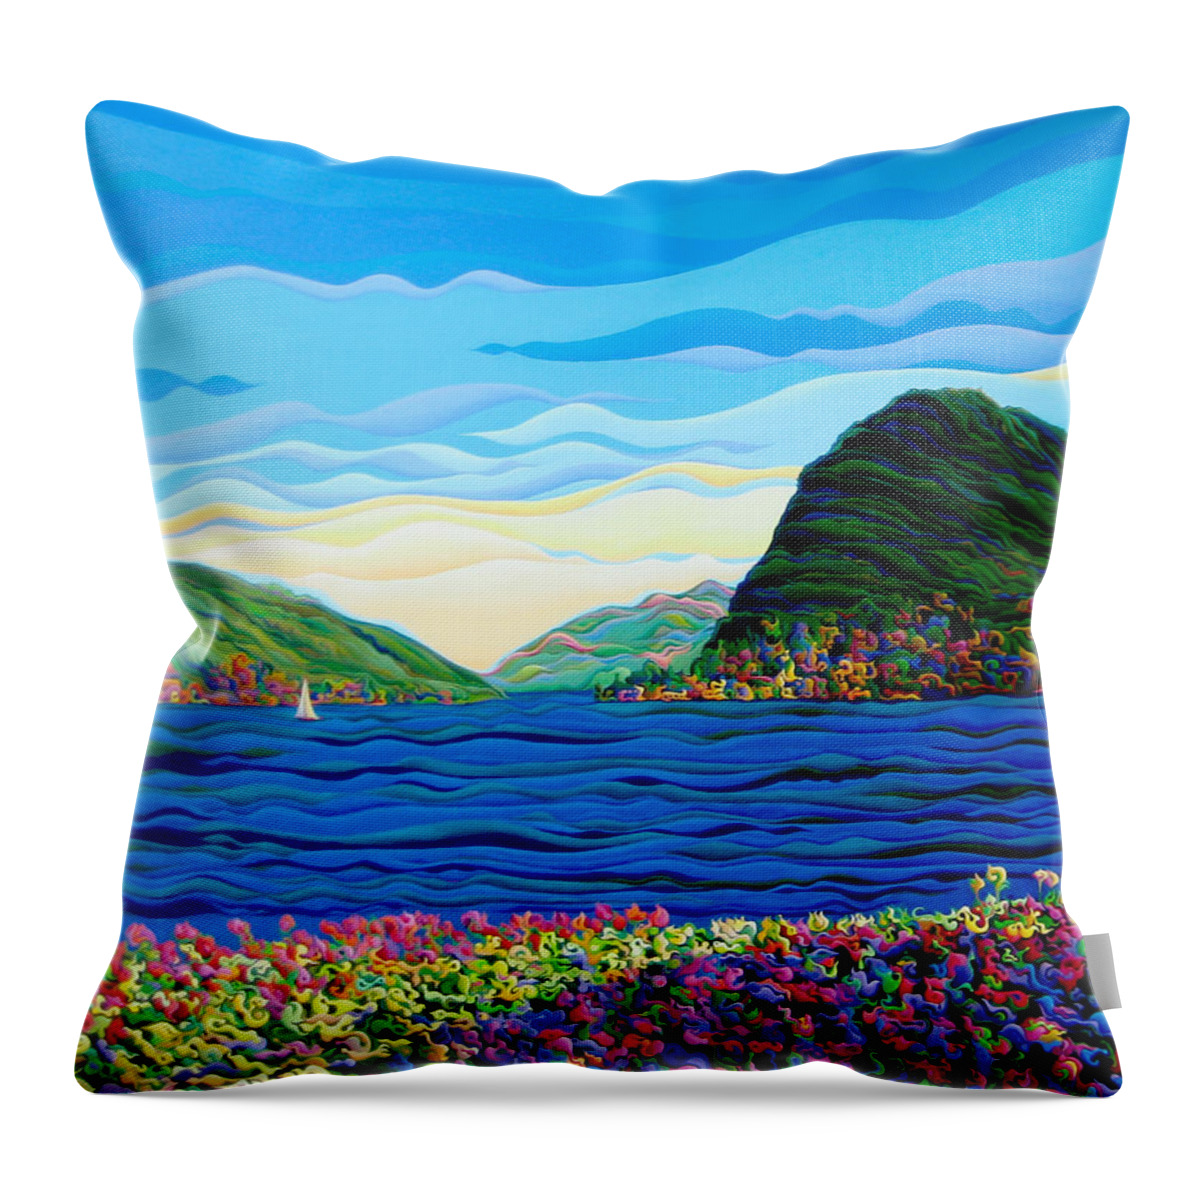 Landscape Throw Pillow featuring the painting Sunny Swiss-Scape by Amy Ferrari